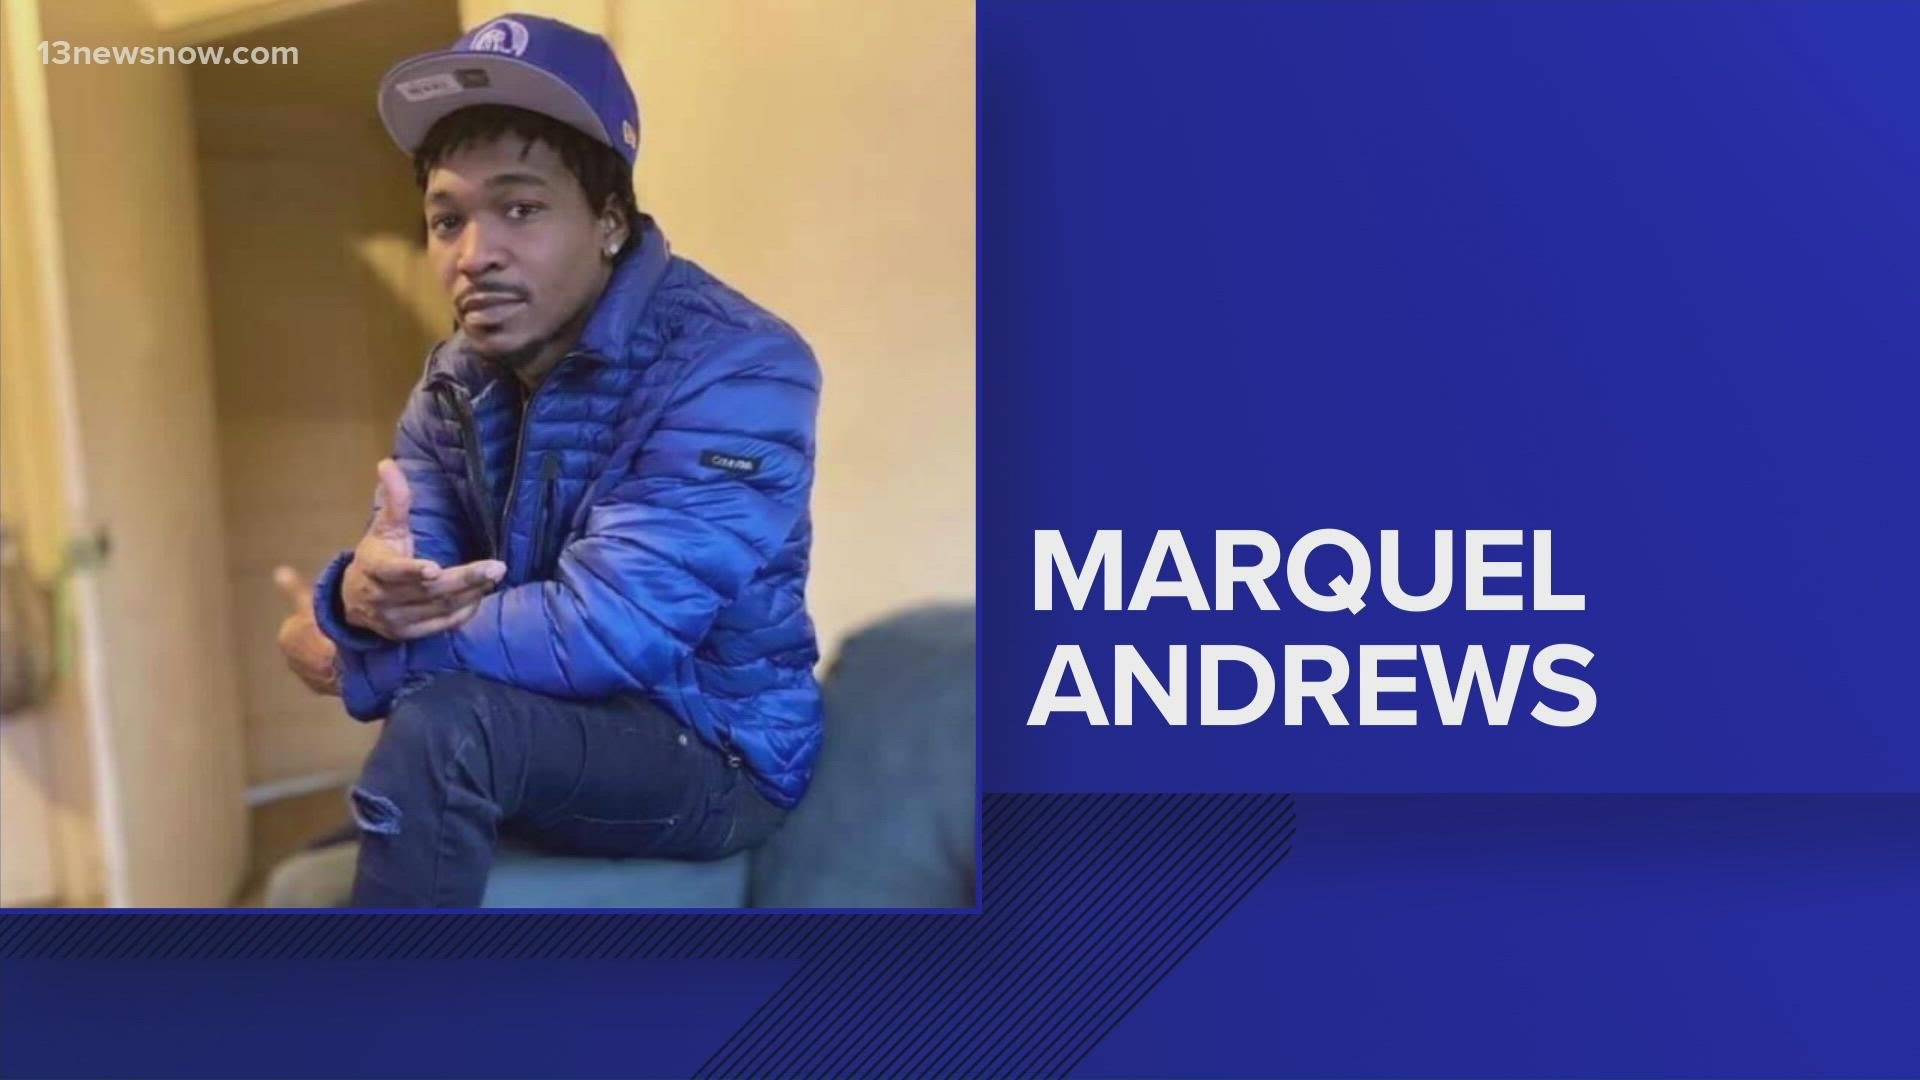 Police said Marquel Andrews, 24, was one of the people hit by gunfire outside of Chicho’s Pizza in Downtown Norfolk after a fight over a spilled drink took place.